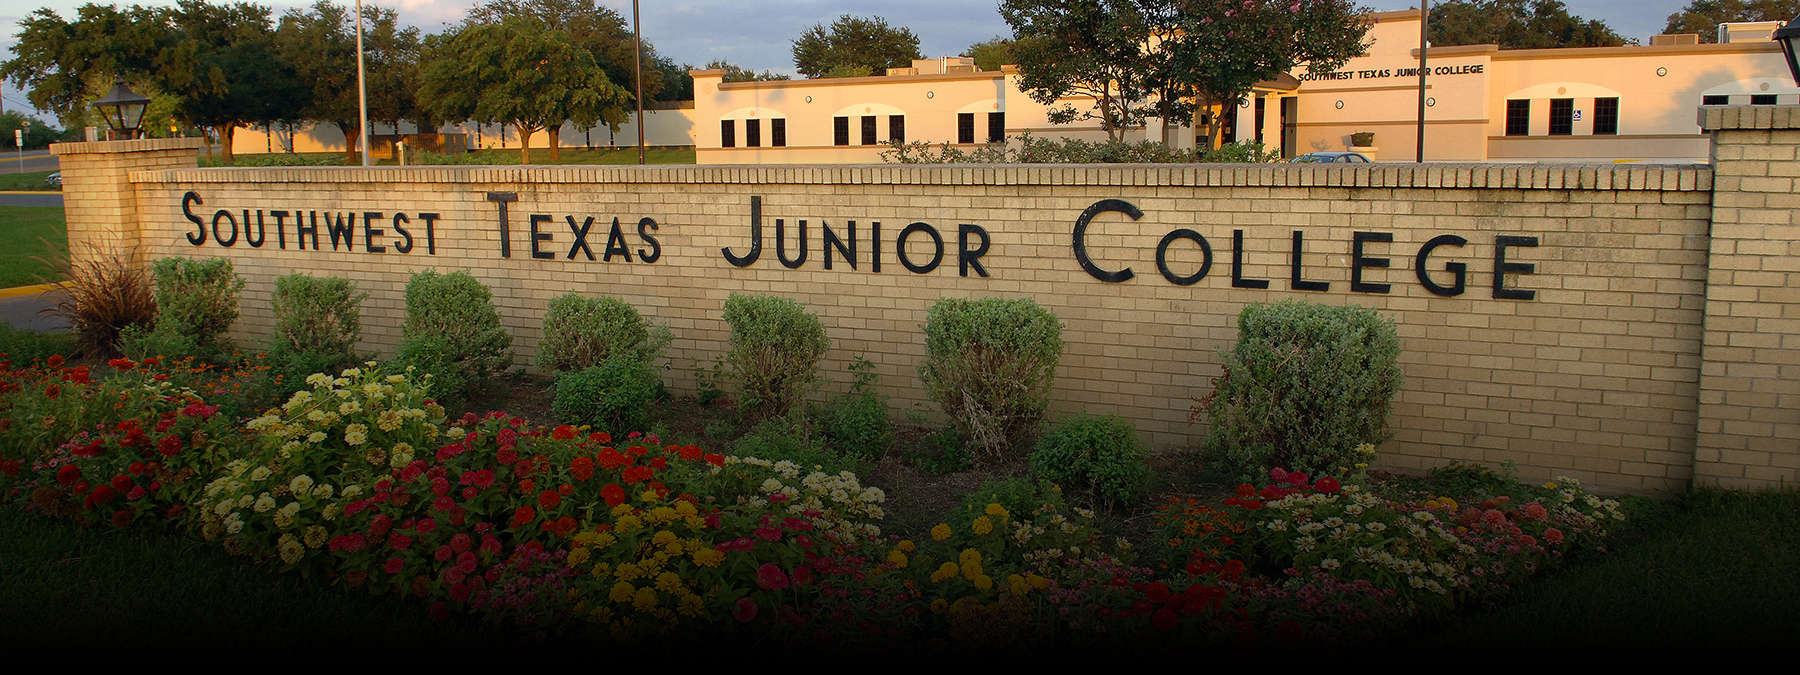 Uvalde's Southwest Texas Junior College brick wall entrance with colorful flowers planted in front of it.